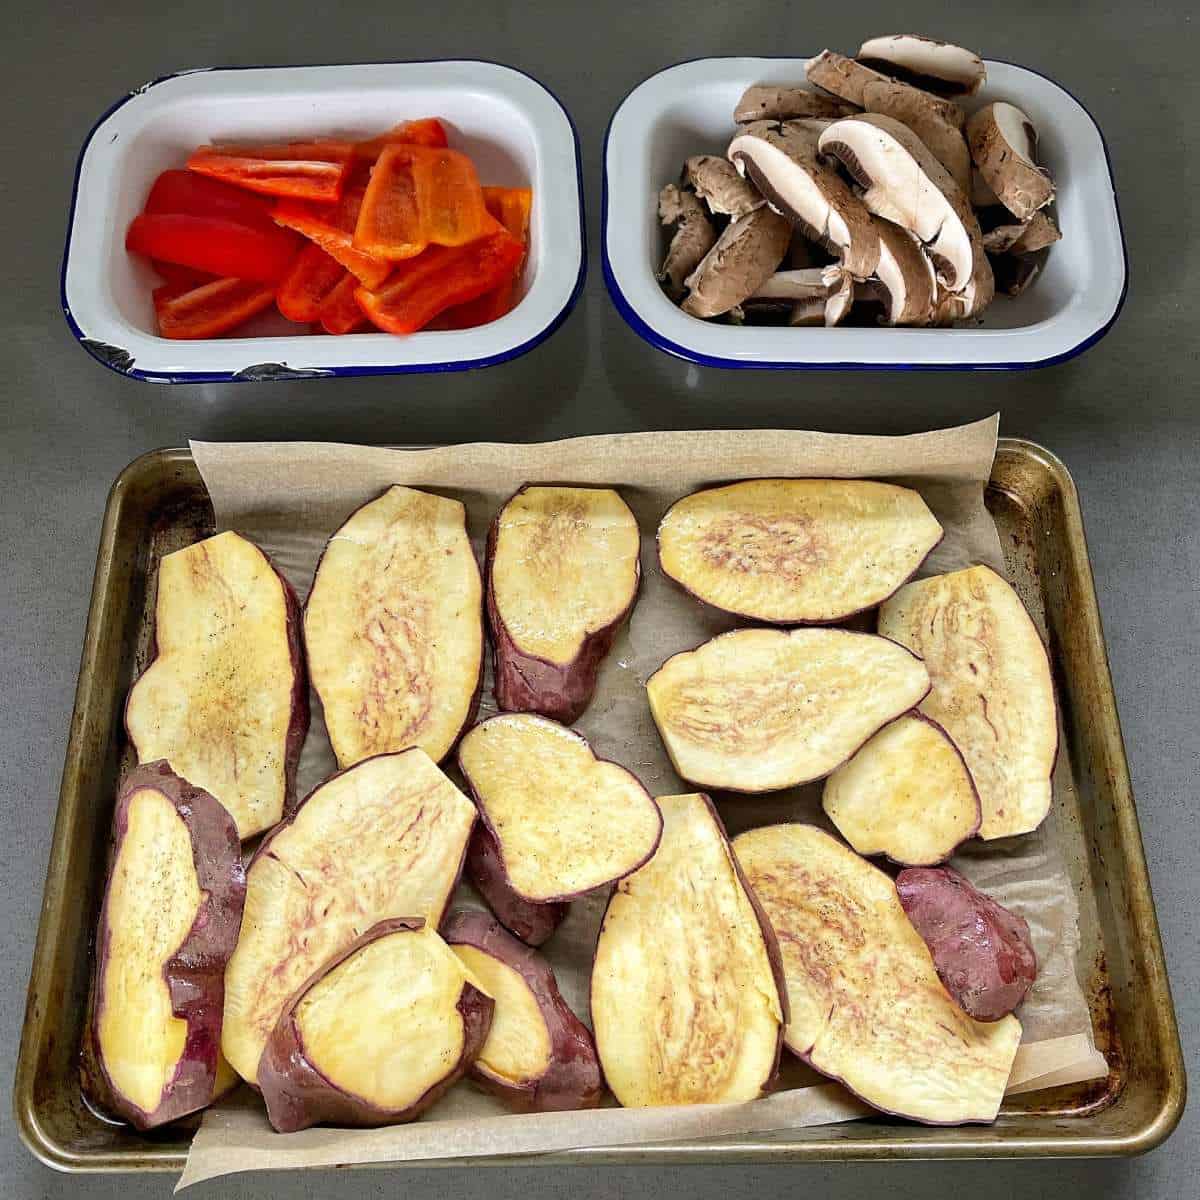 Sliced kumara, large mushrooms and red capsicum in separate dishes on a grey bench top